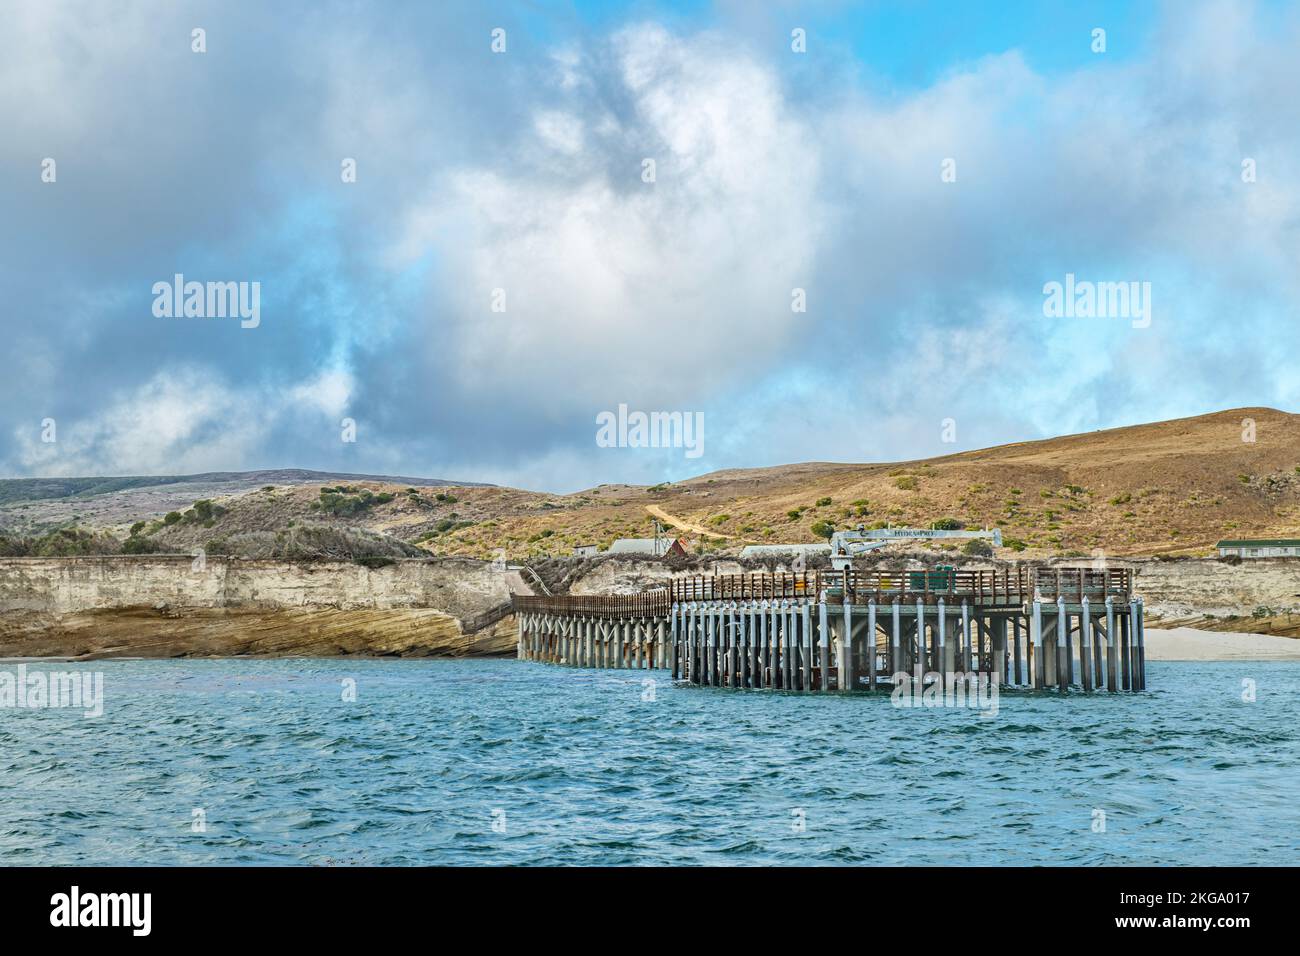 Santa Rosa Island, one of eight Channel Islands, has a pier for rangers and approved guests to access the island for tours and research. Stock Photo